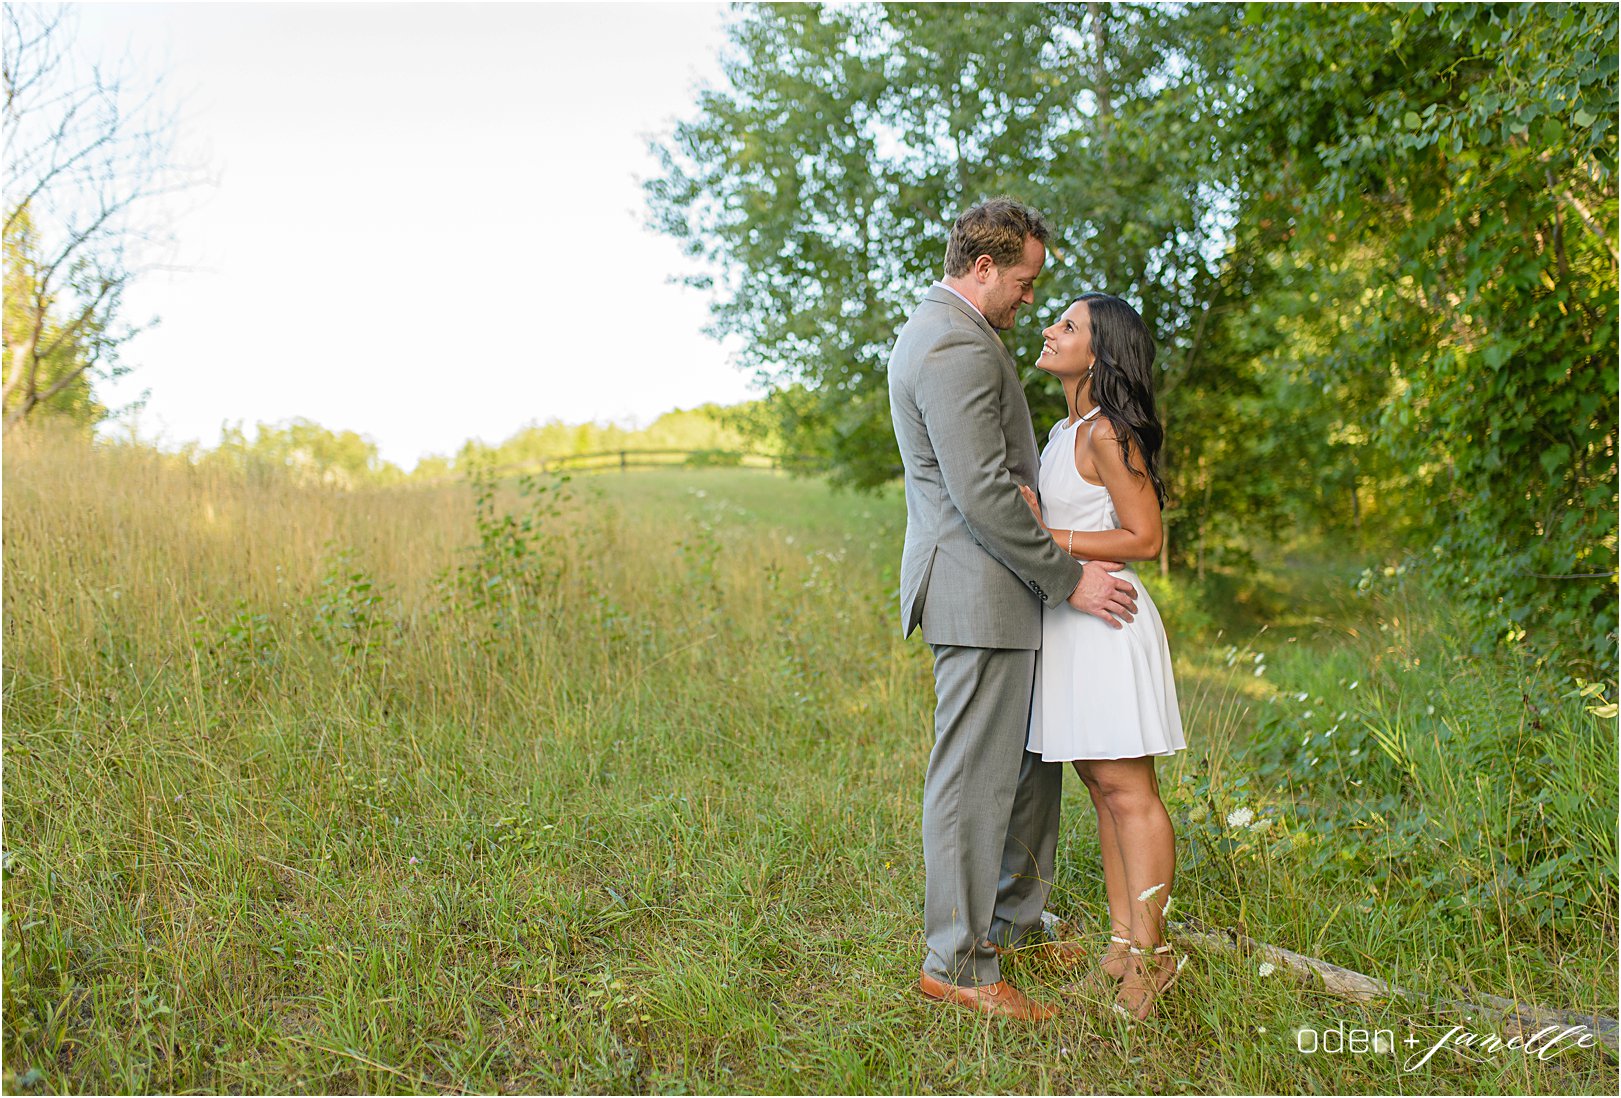 ELENA + JESSE | Oden and Janelle Photography 2016 |ODE_4990|17.jpg